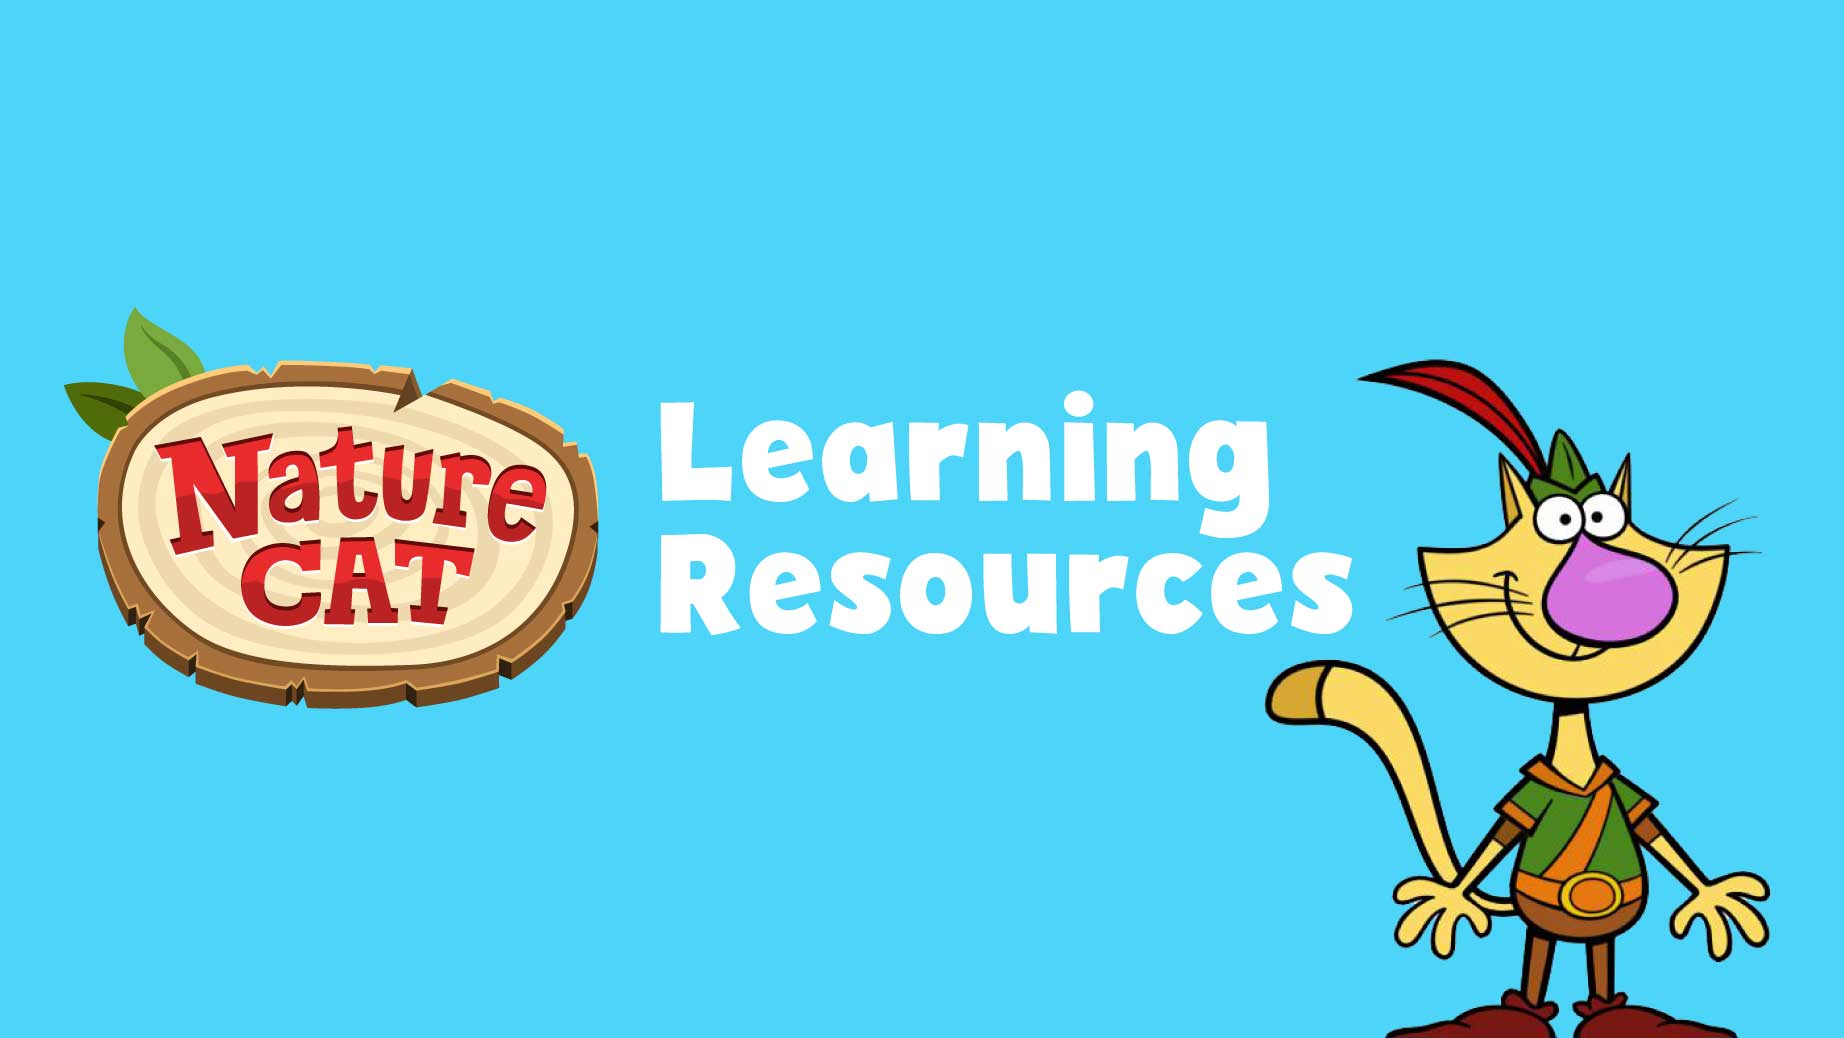 Nature Cat Learning Resources